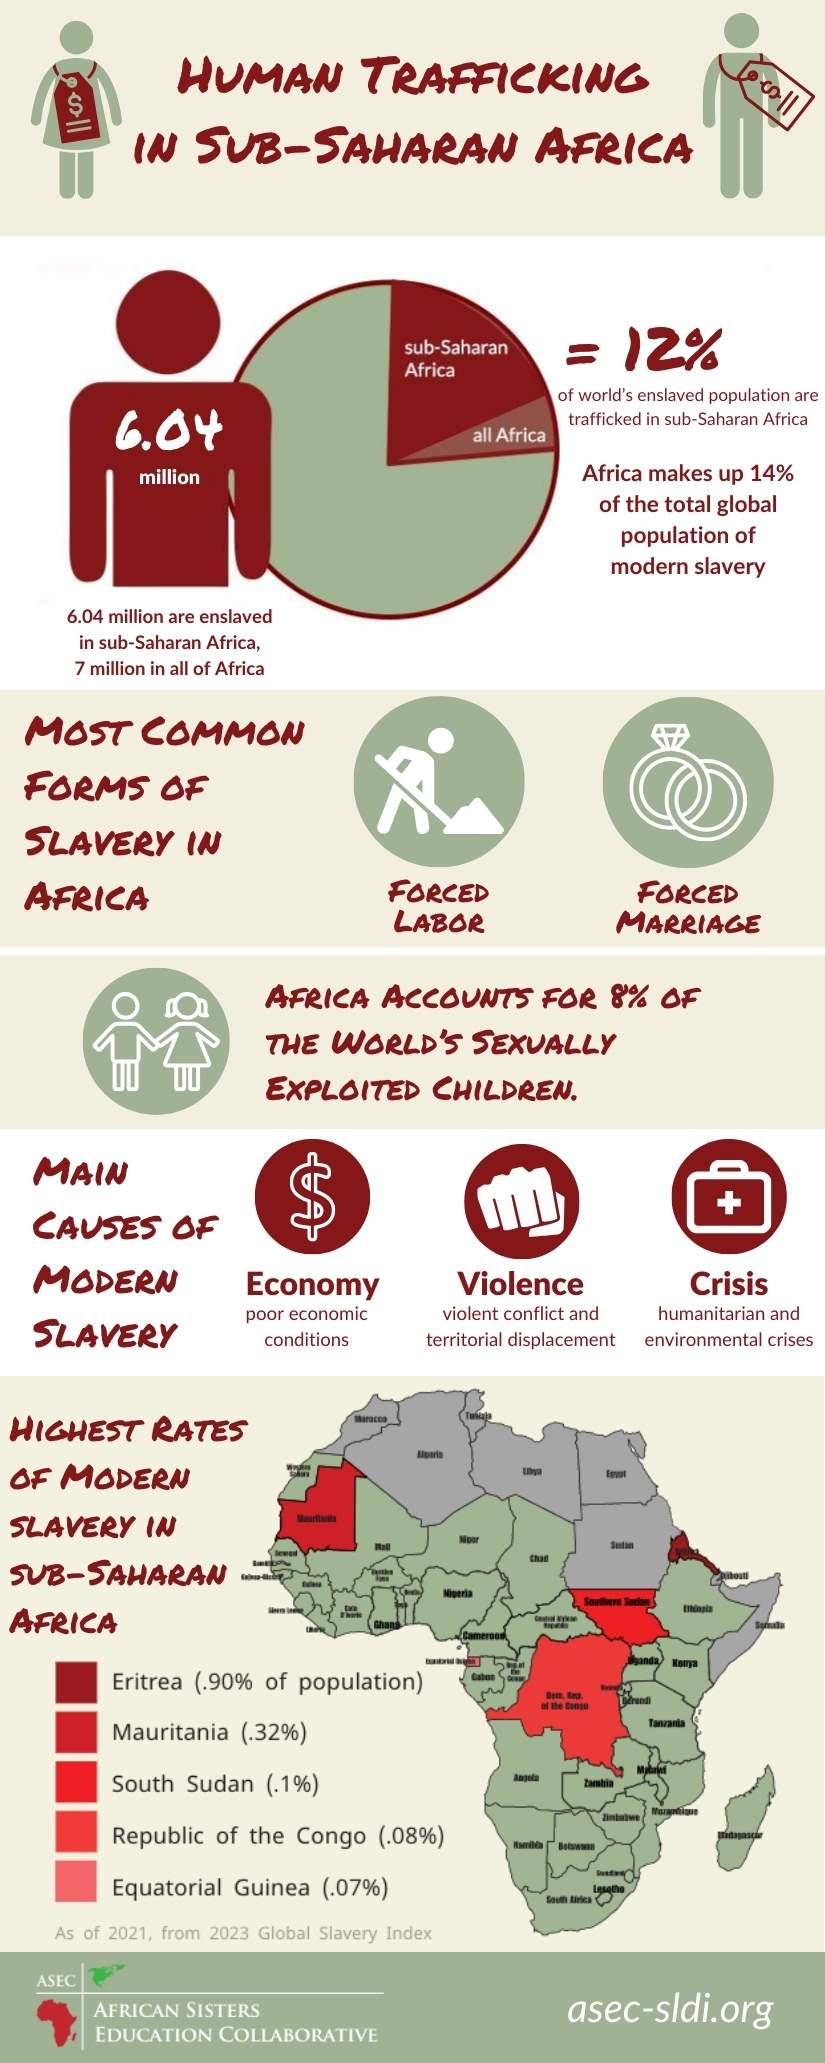 Modern Slavery Statistics in sub-Saharan Africa Infographic. Statistics as of 2016, from the 2018 Global Slavery Index.